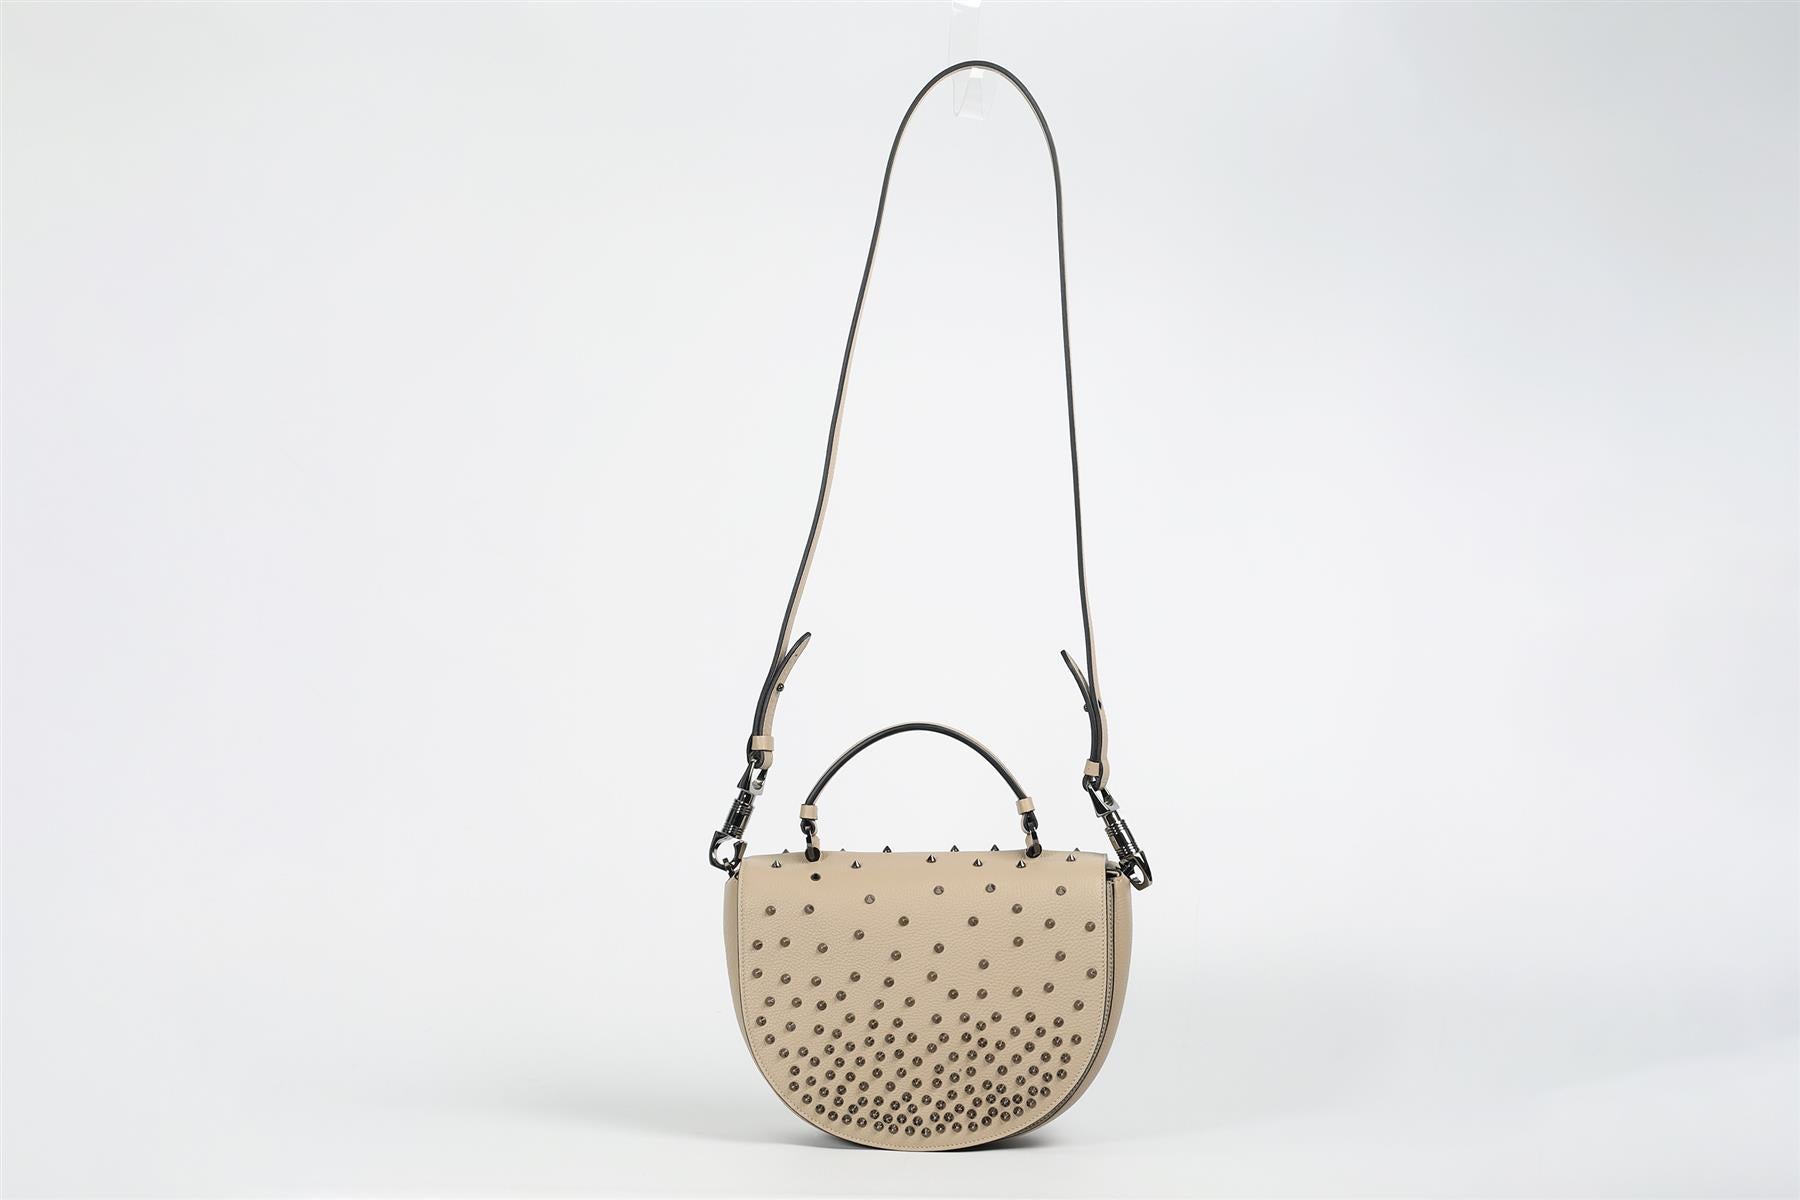 CHRISTIAN LOUBOUTIN PANETTONE SPIKED LEATHER SHOULDER BAG